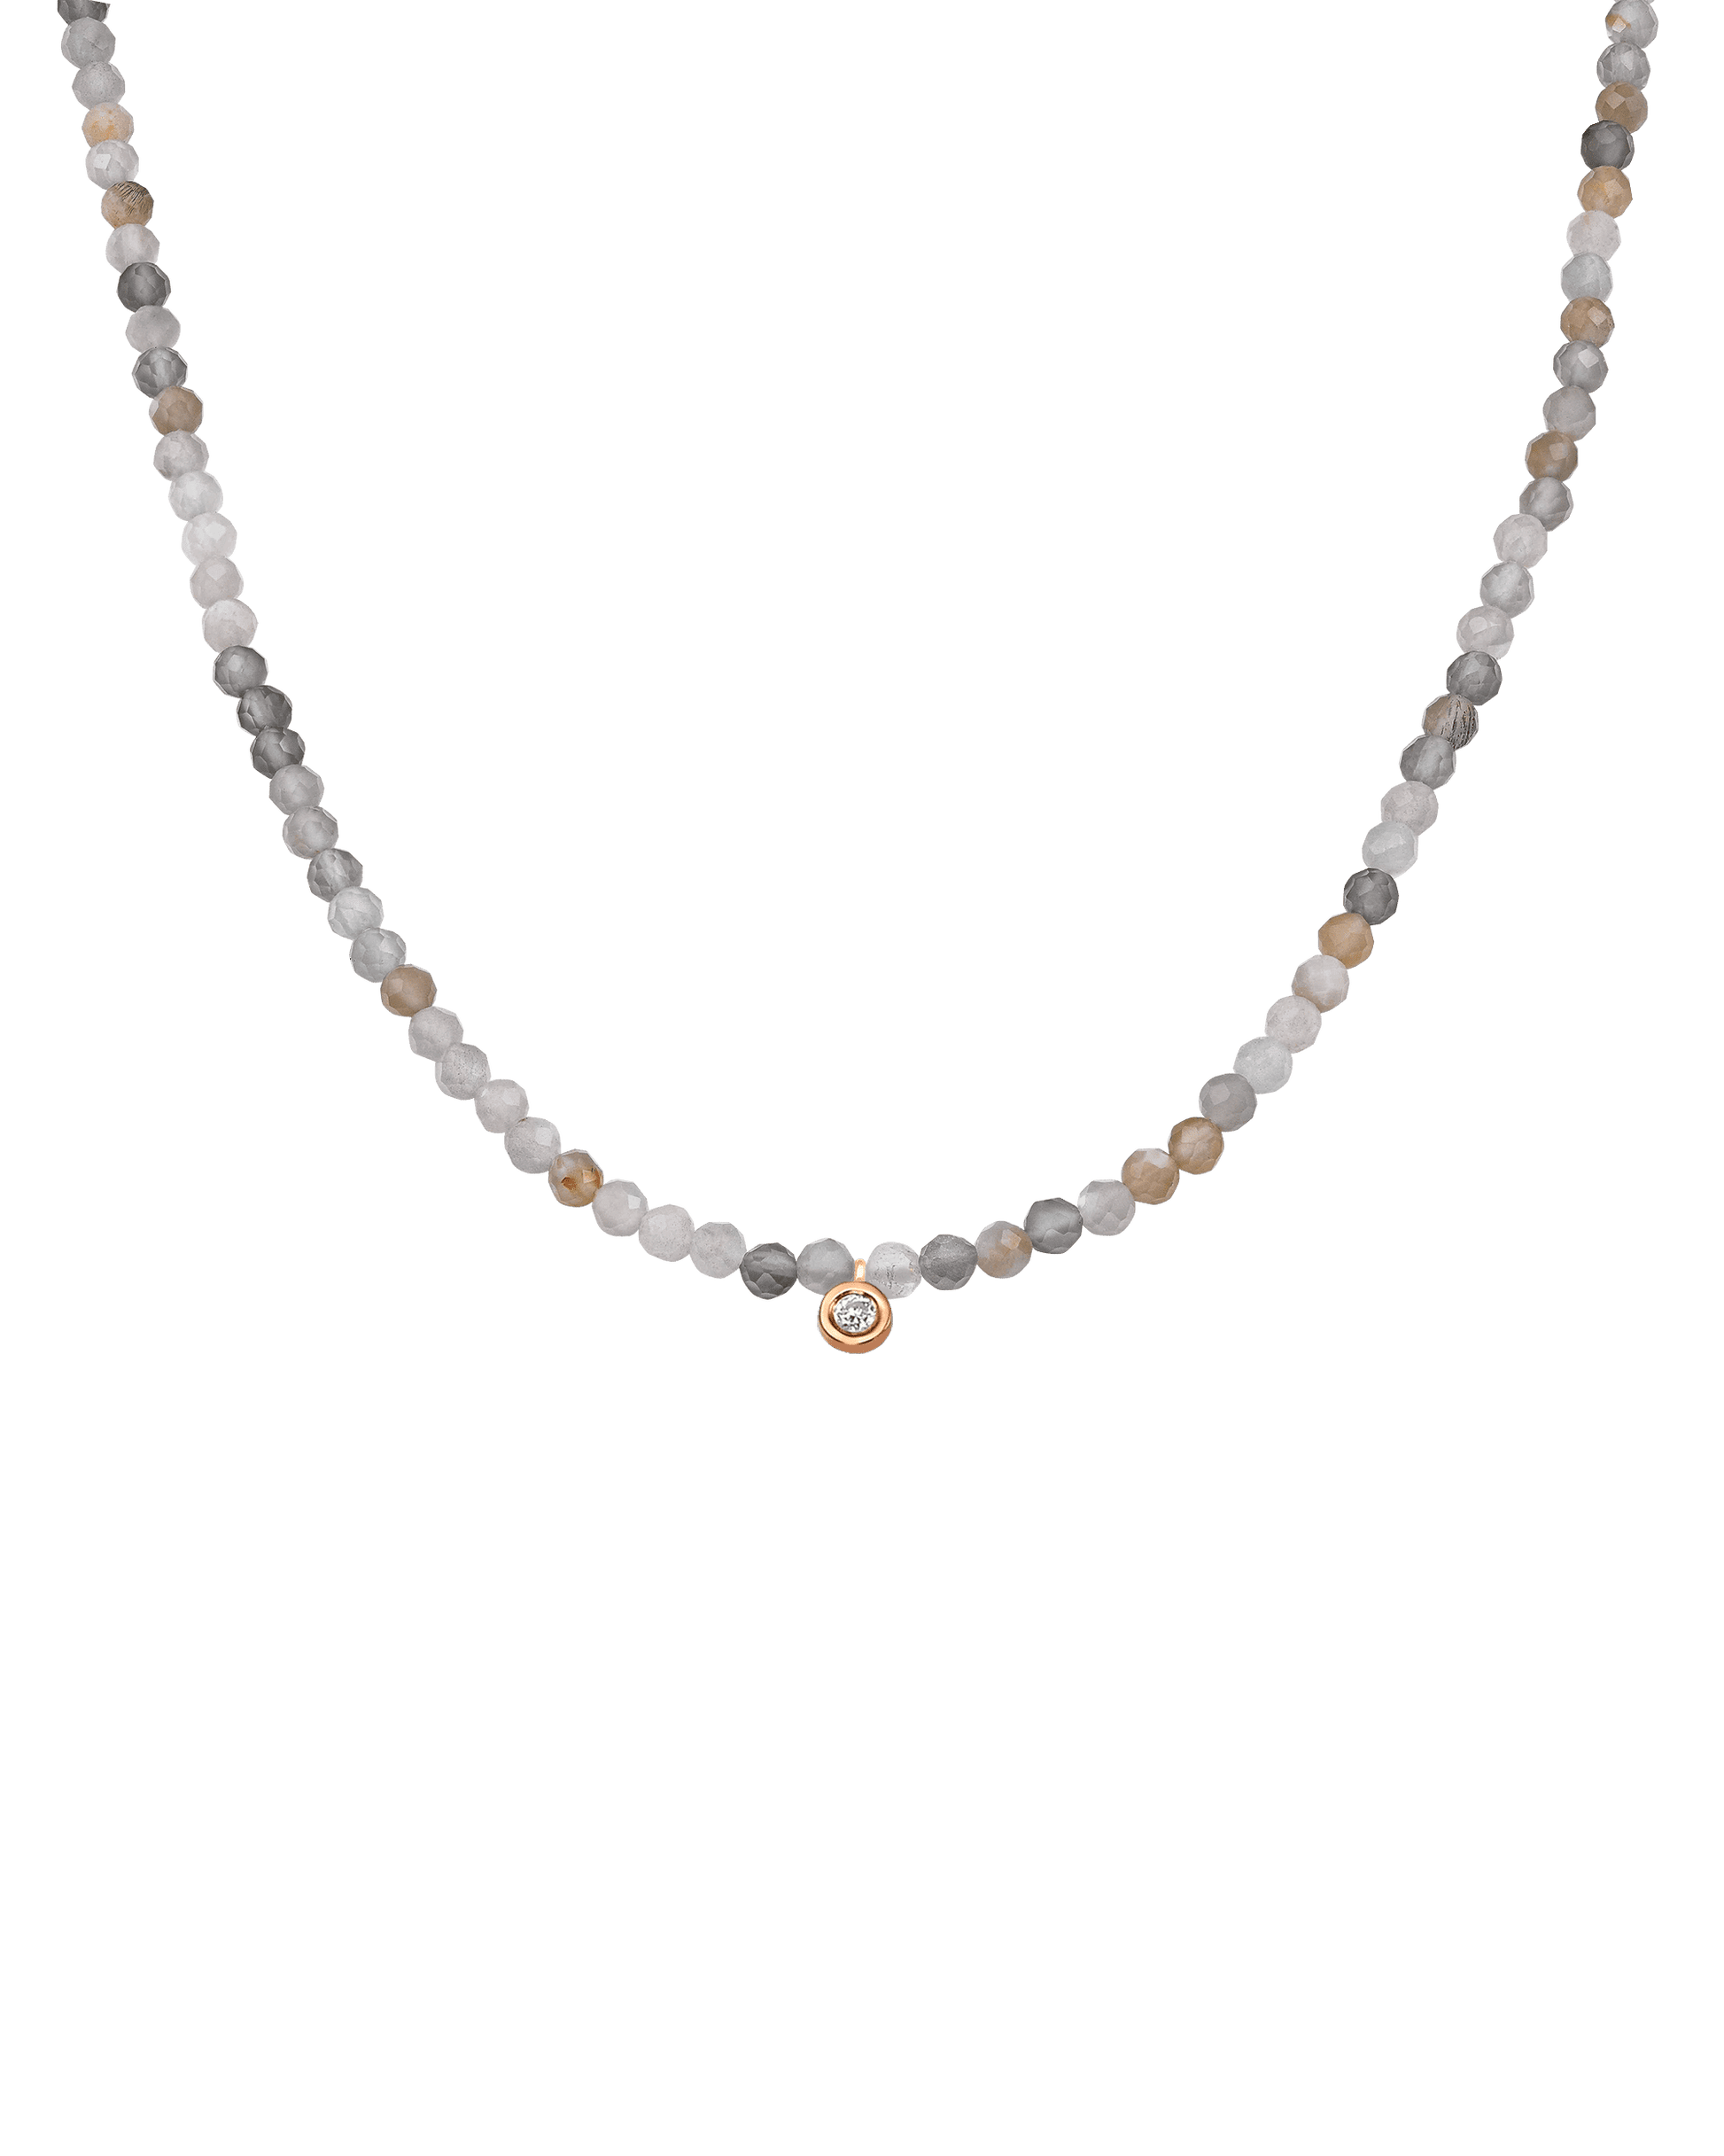 The Gemstone & Diamond Necklace - 14K Rose Gold Necklaces 14K Solid Gold Natural Moonstone Small: 0.03ct 14"